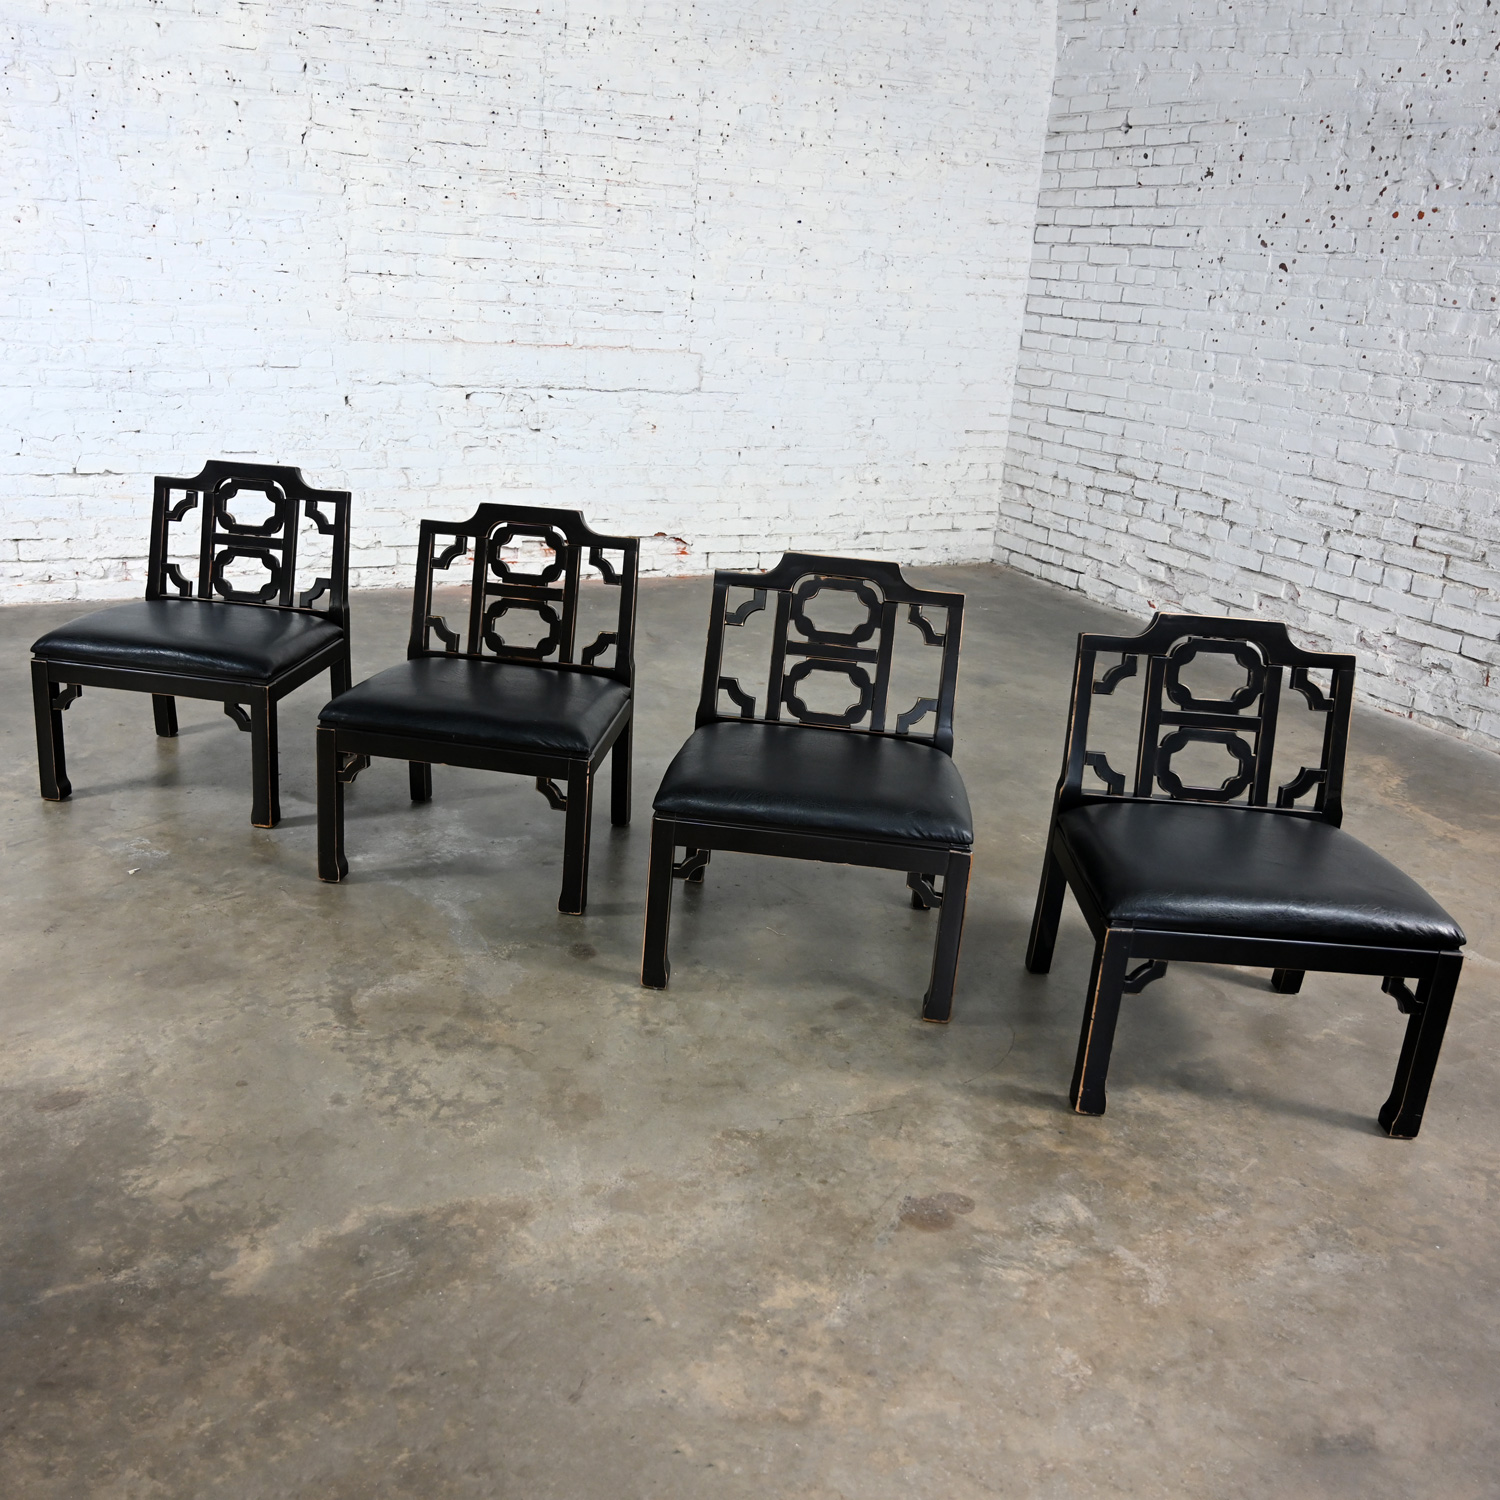 1971 Hollywood Regency Chinoiserie Chinese Chippendale Style Occasional Chairs by Thomasville Black Low Profile Set of 4